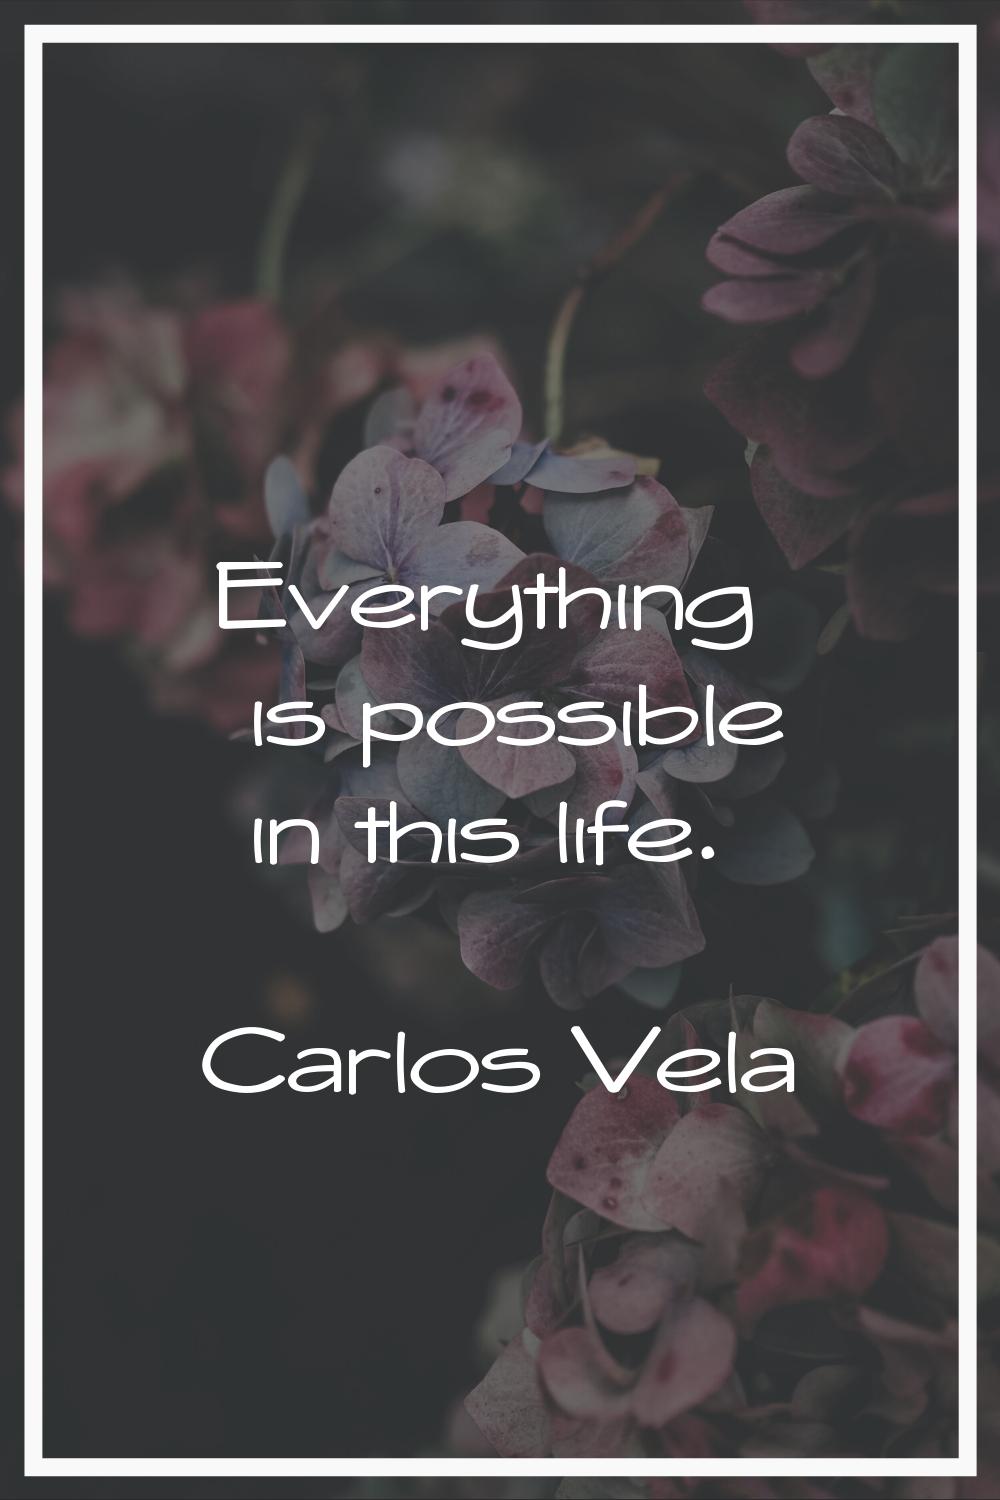 Everything is possible in this life.